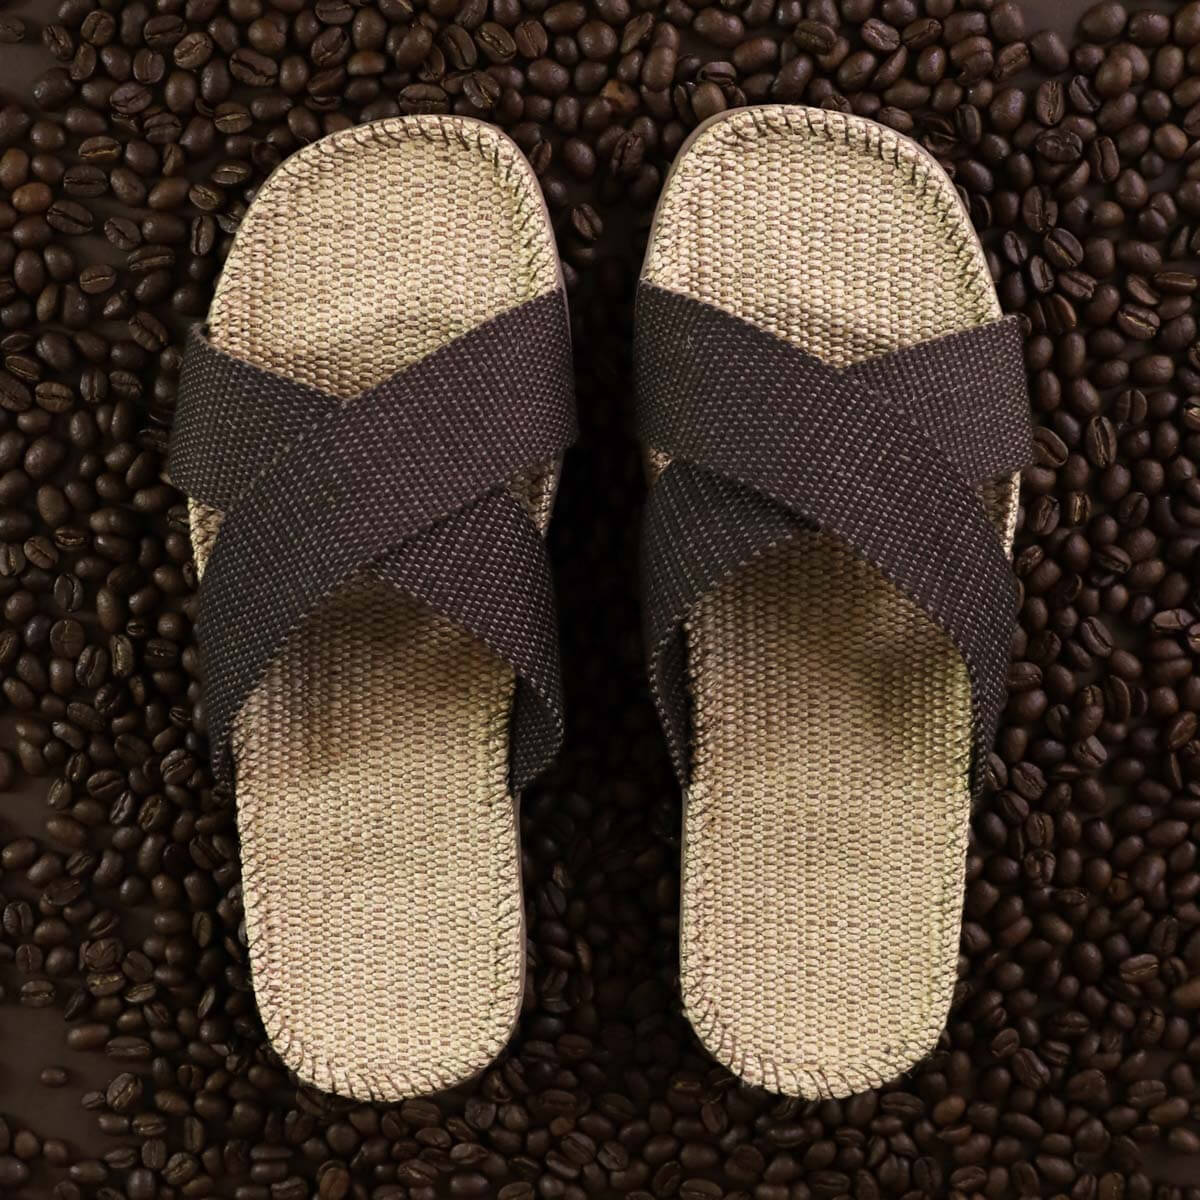 Danish Sandals - Unisex | Brown Coffee | Light Breathable Washable | by Shangies - Lifestory - Shangies by Stilov